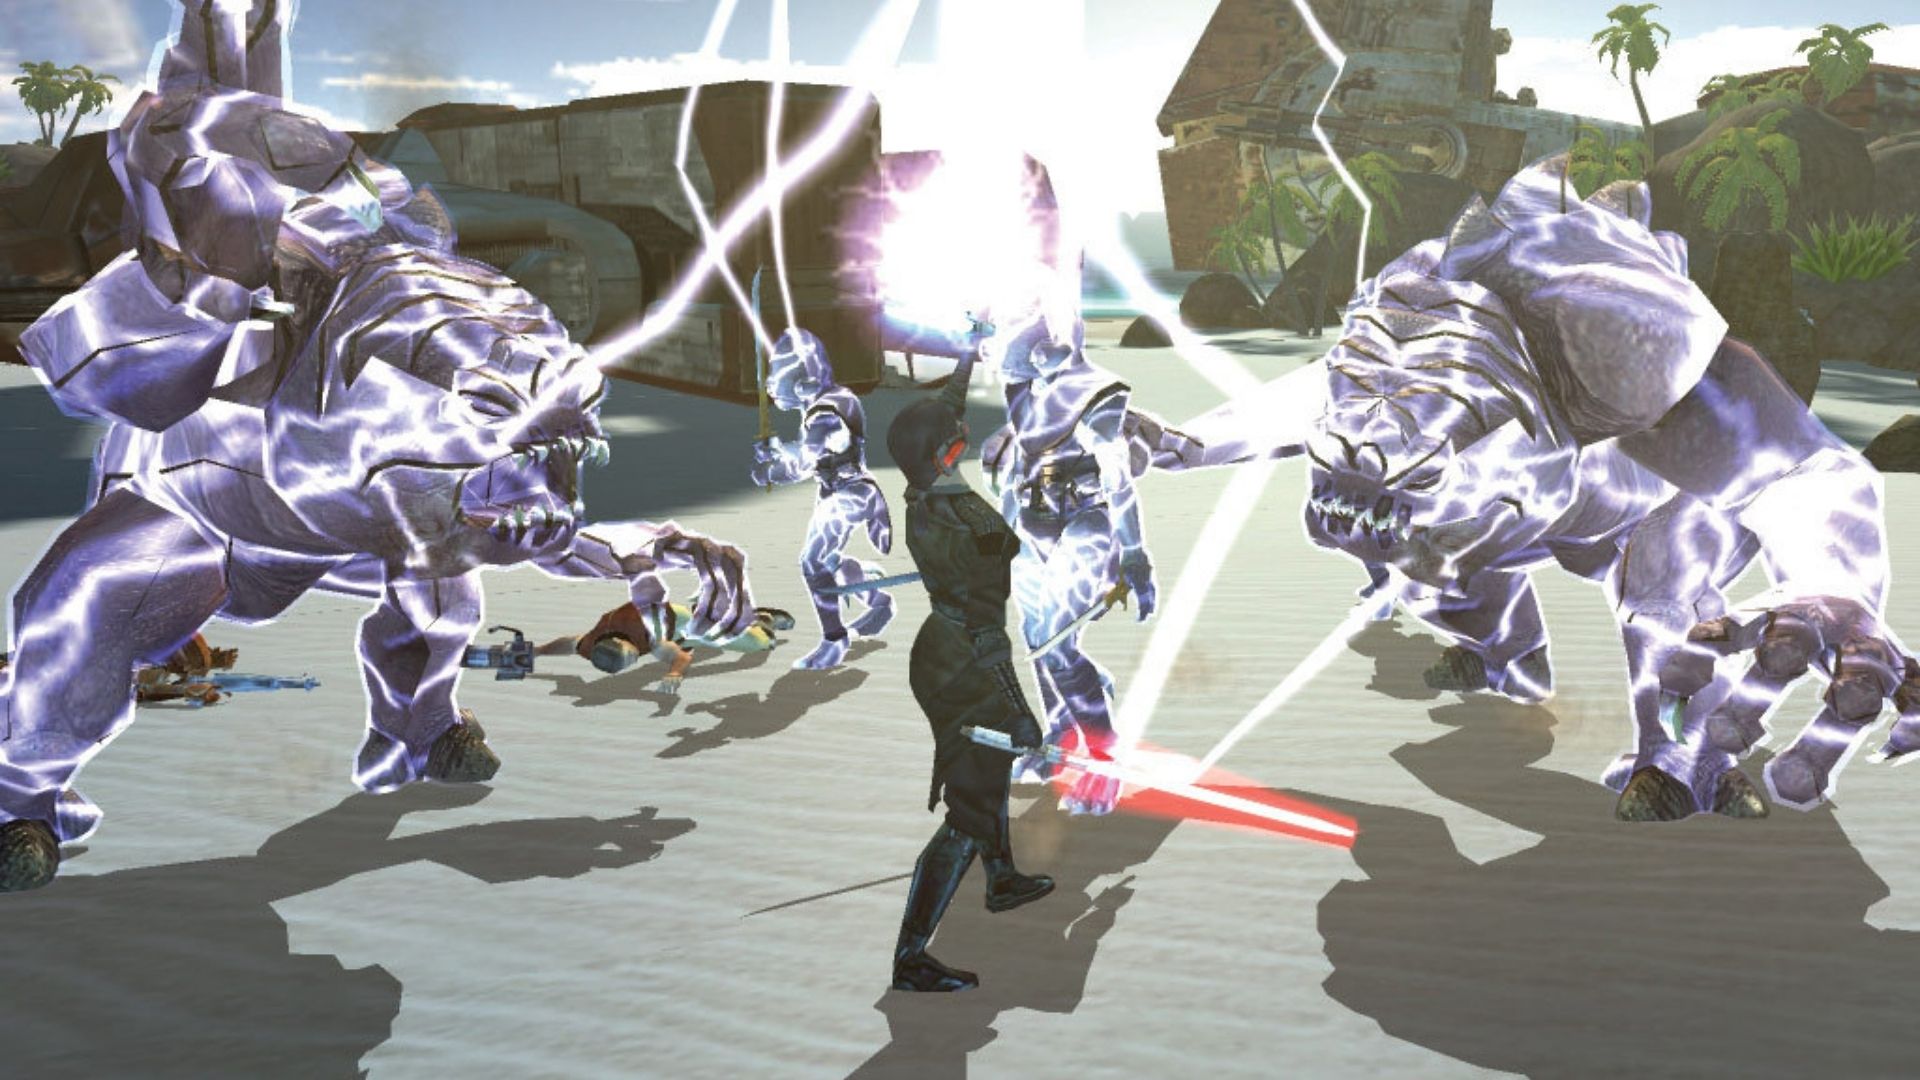 A Jedi electrocutes strange enemies in the desert in Star Wars: Knight's of the Old Republic.